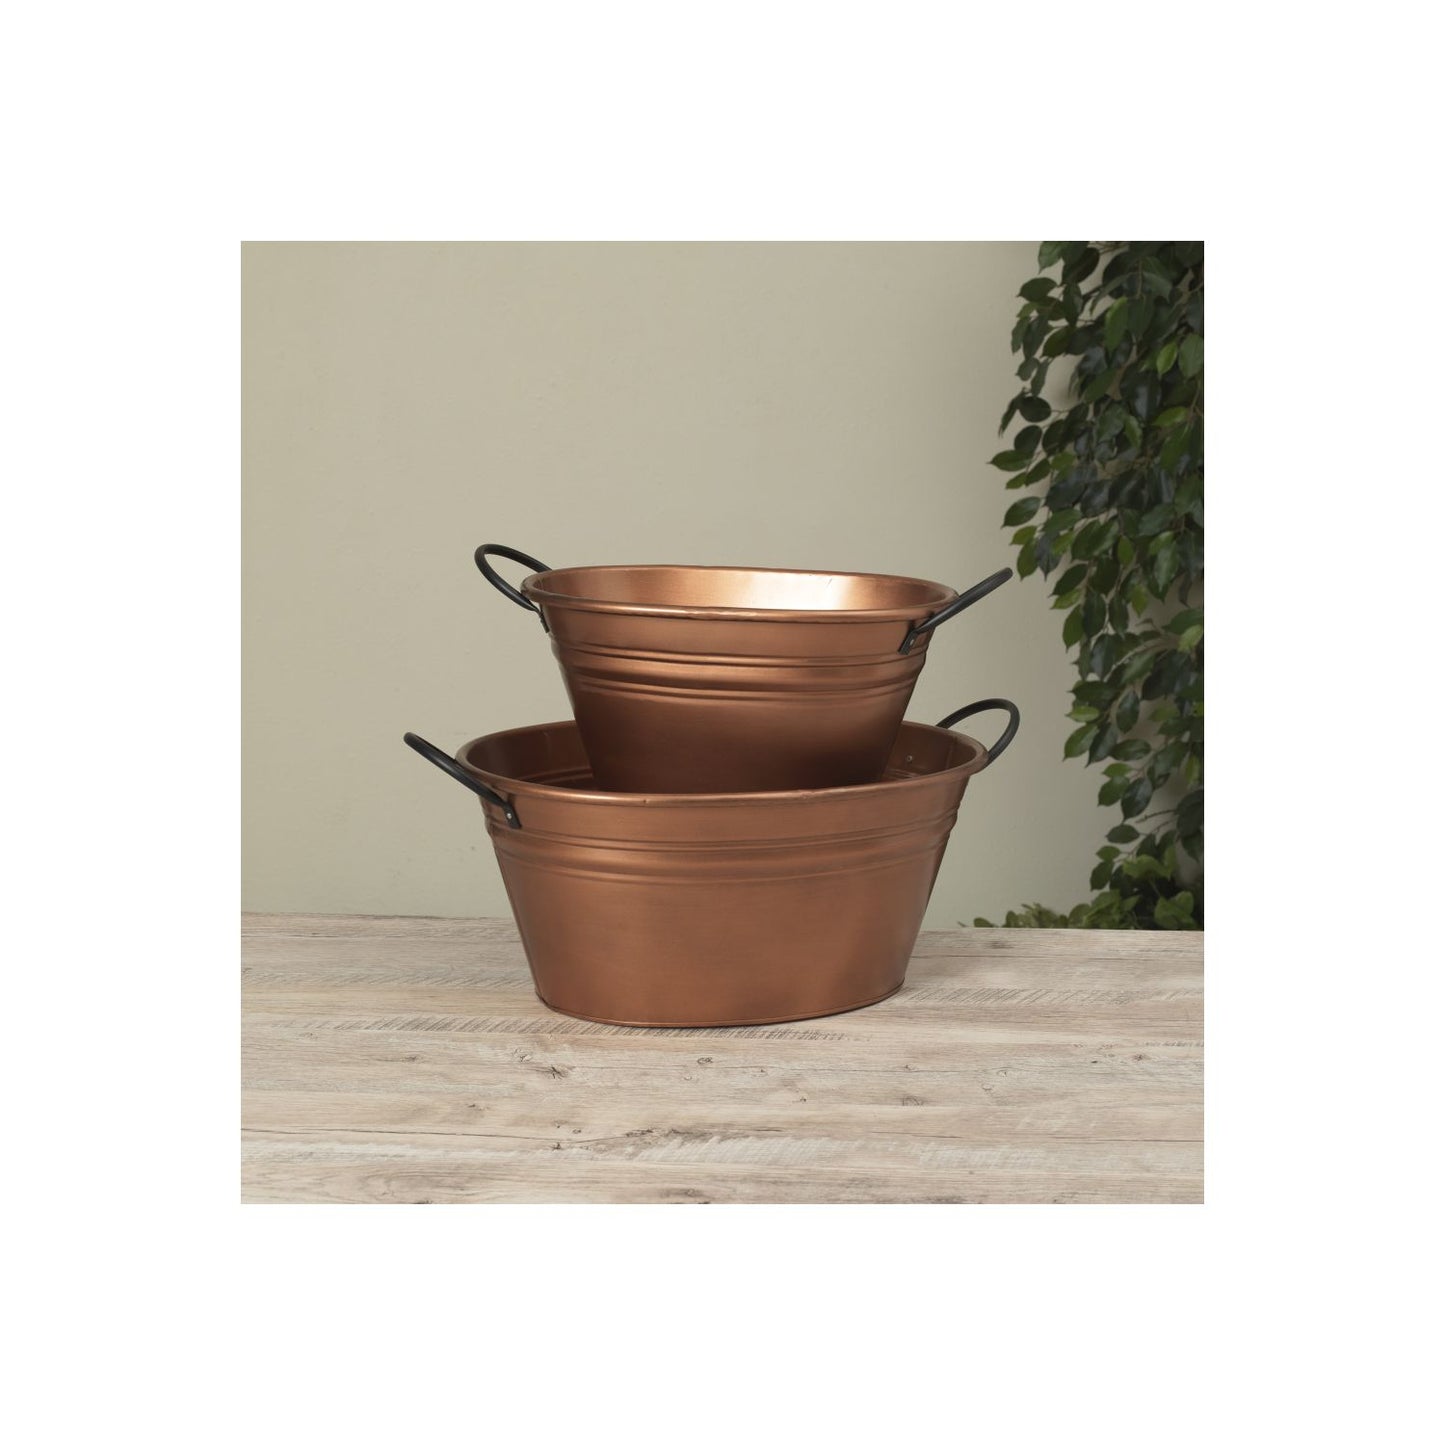 Gerson Company Set of 2 Nesting Antique Copper Metal Buckets